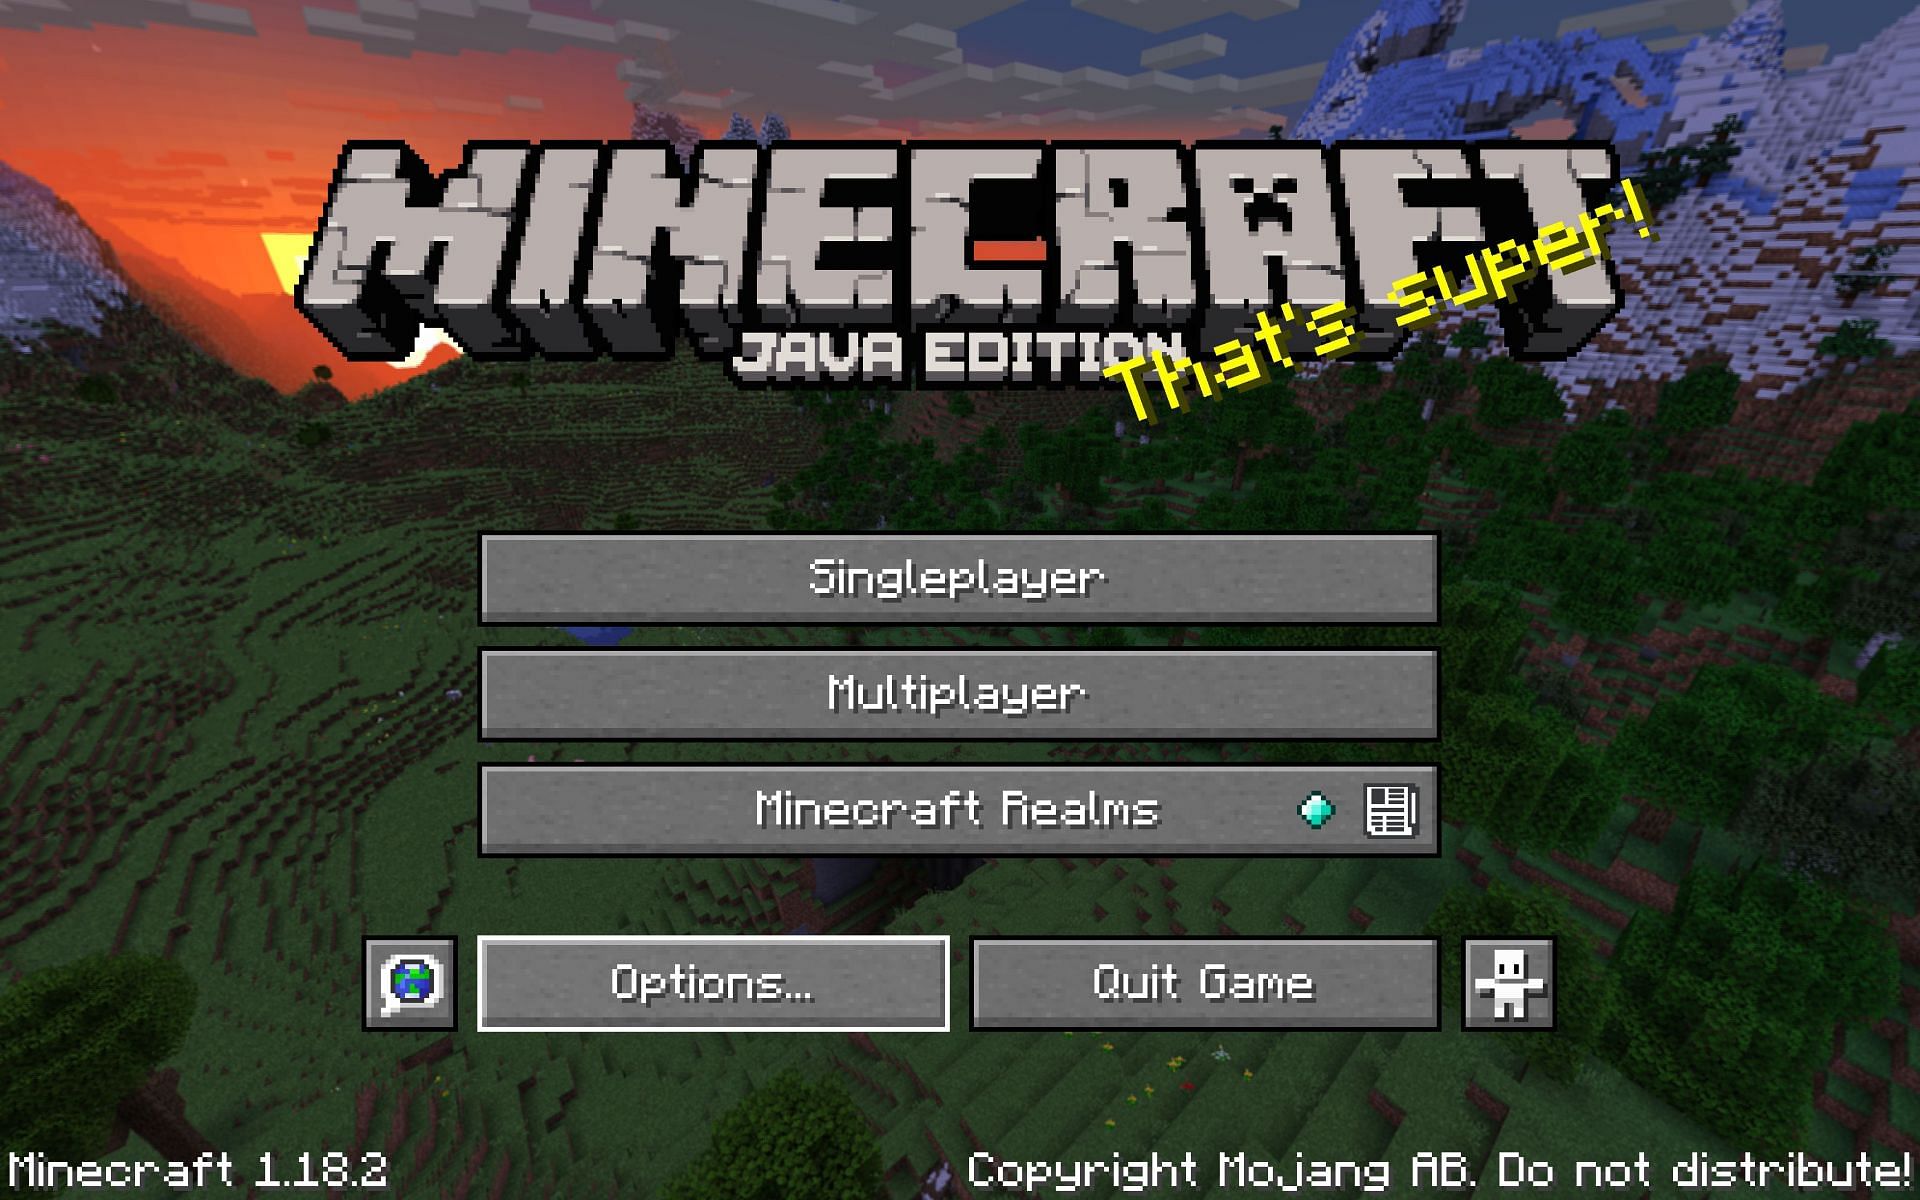 minecraft for free for mac